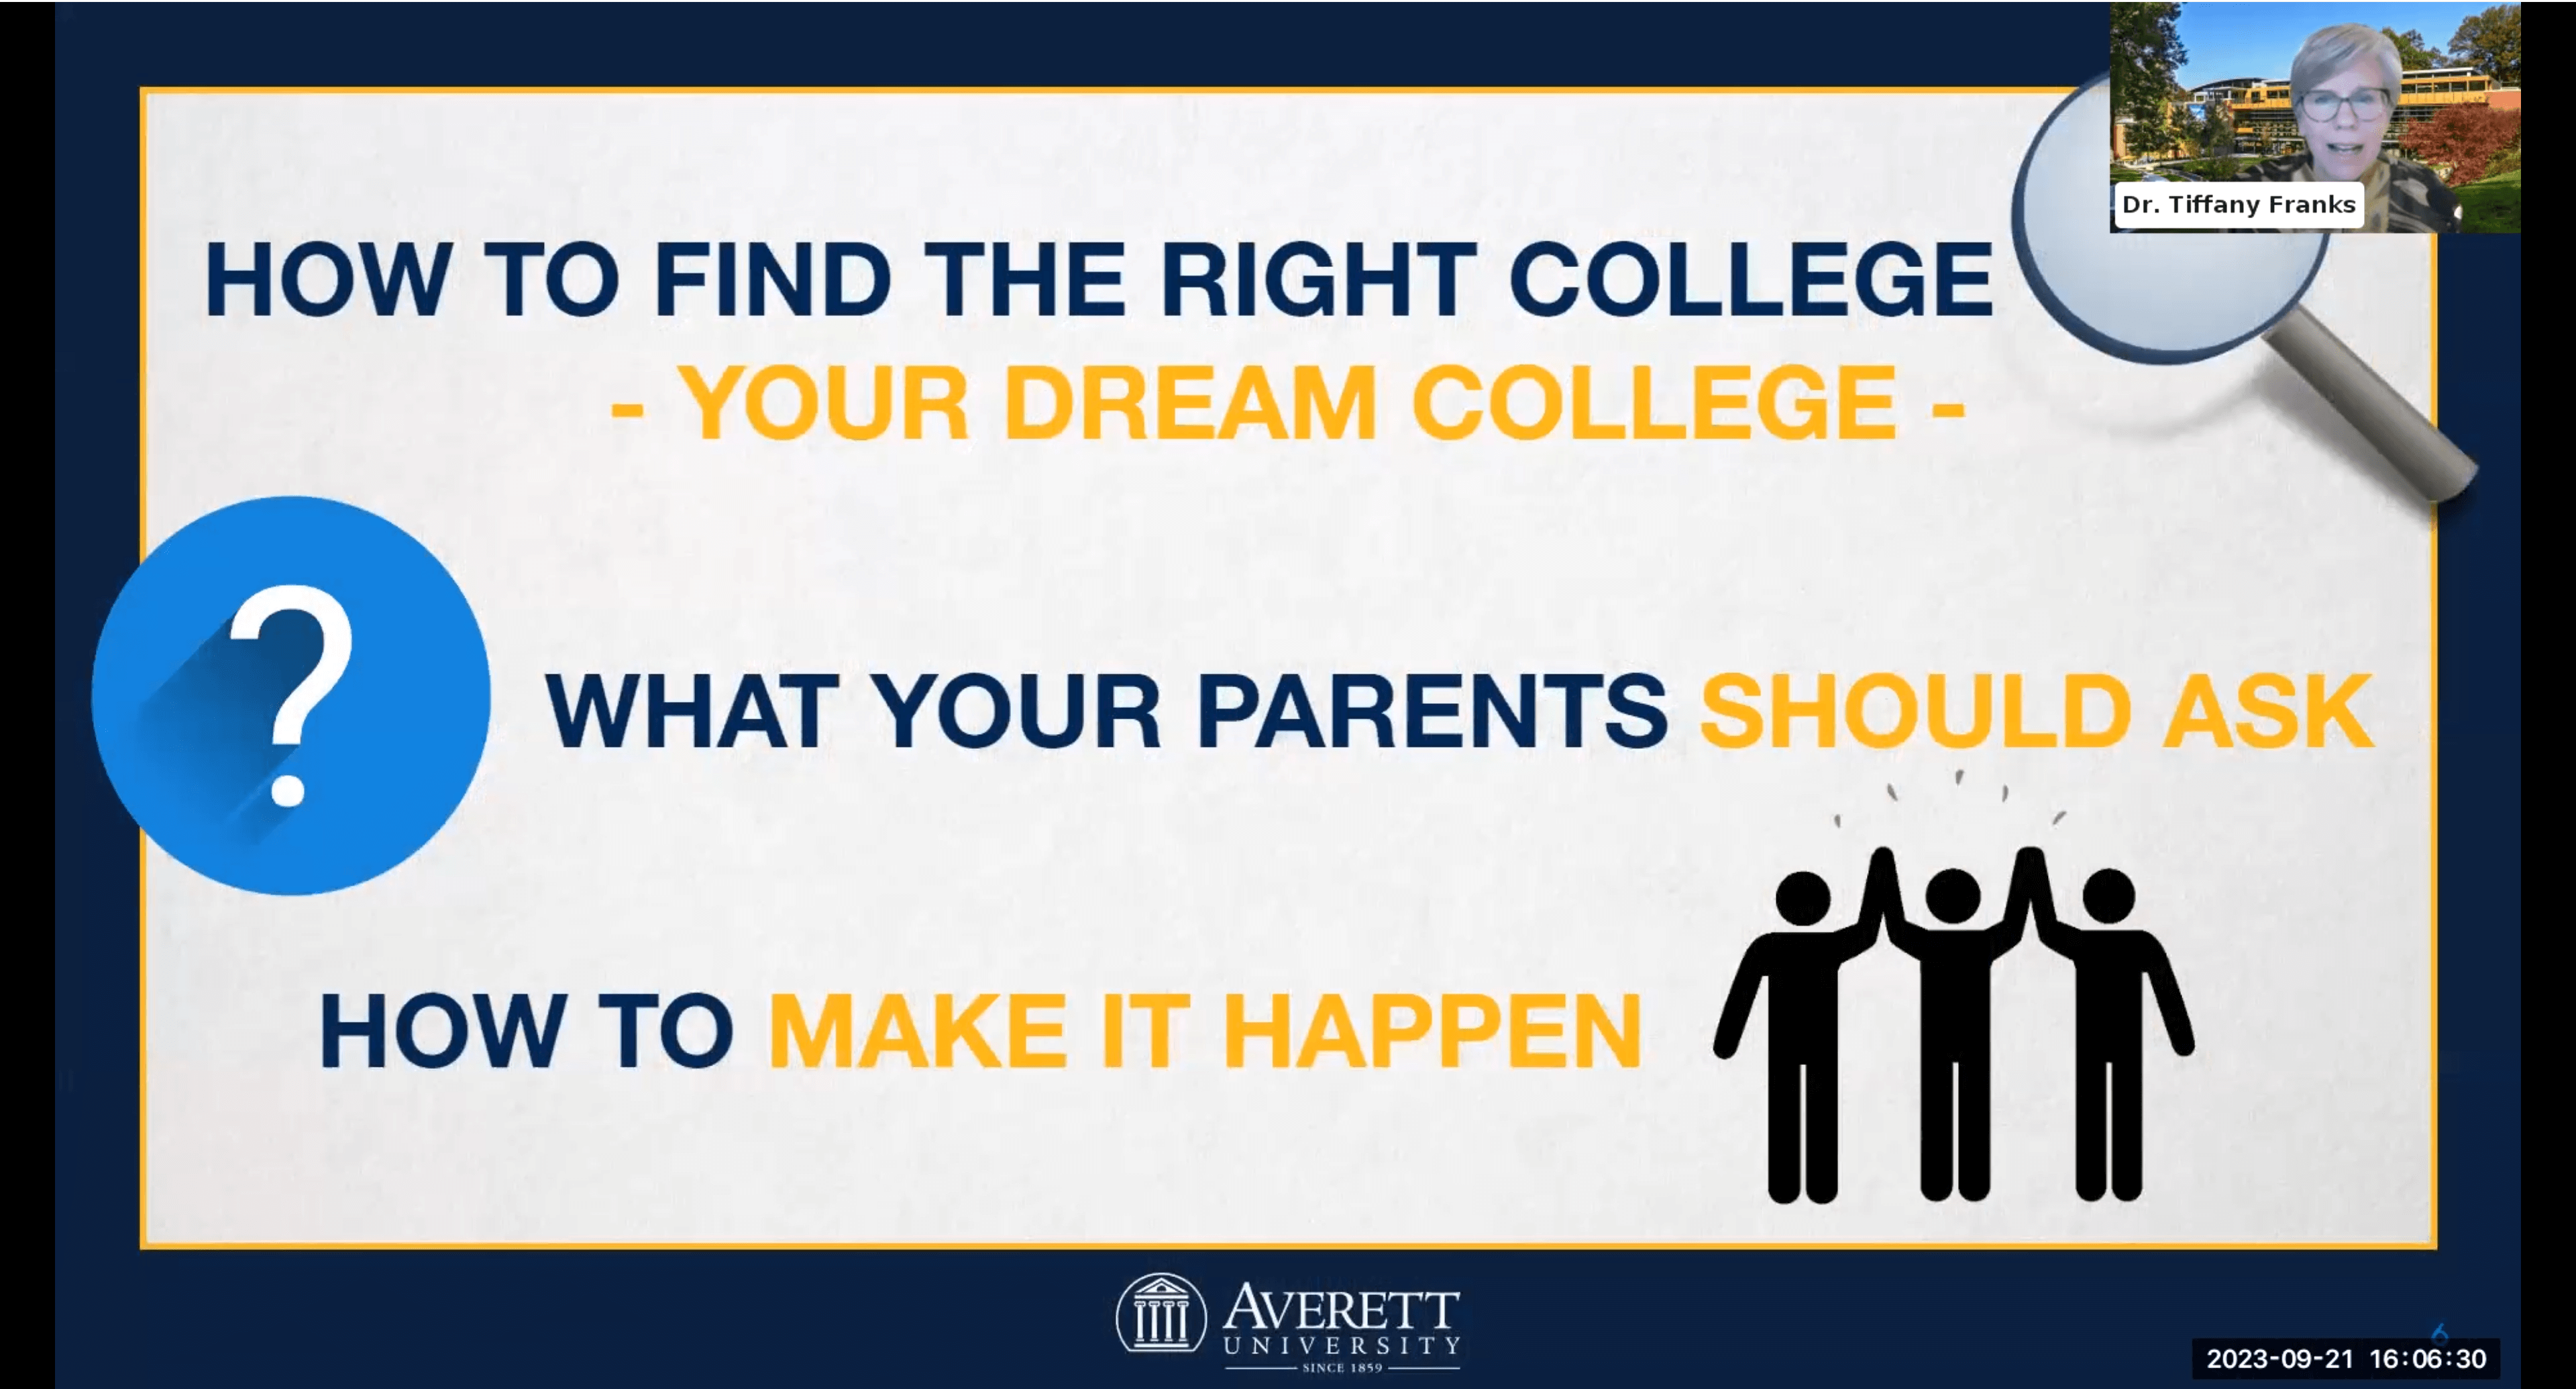 Pro tips for finding your dream college, what parents should ask, and how to make it happen. Let's g